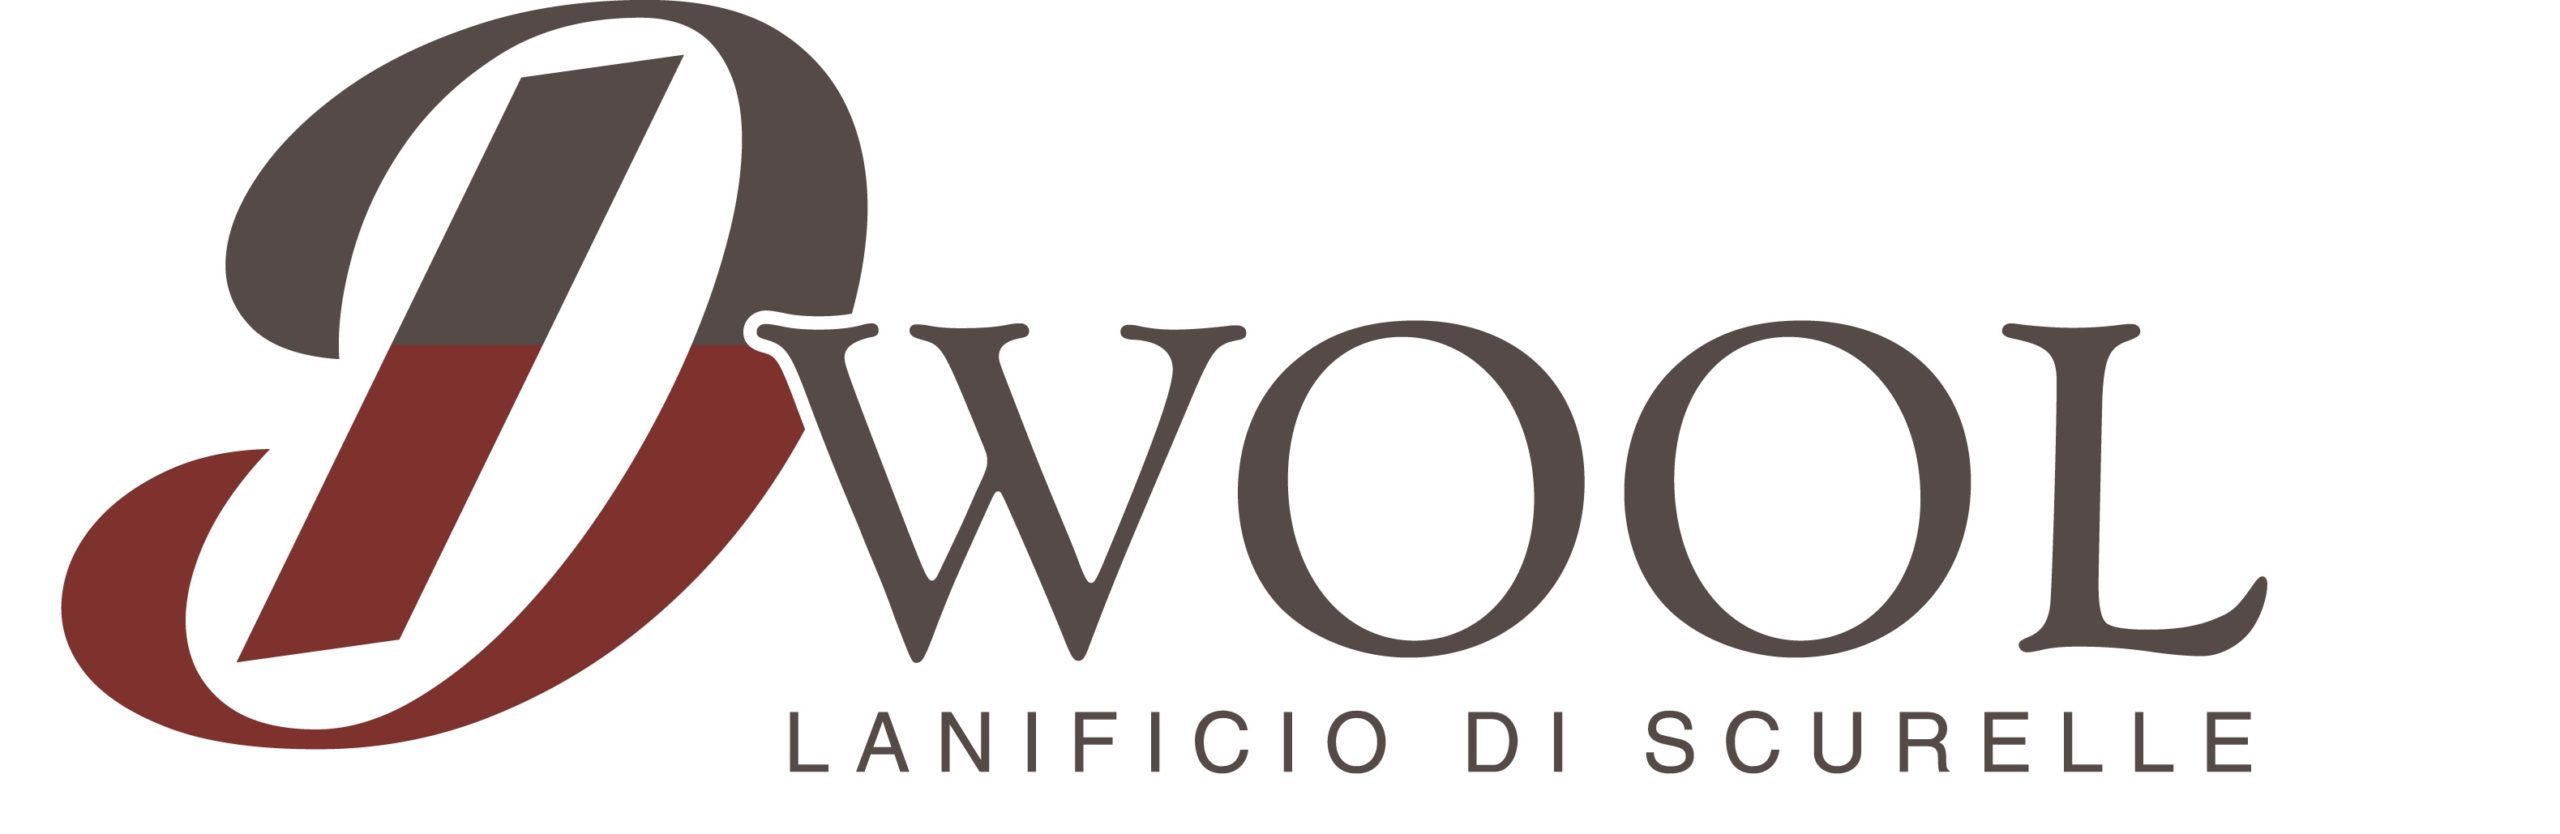 Dalsasso Wool